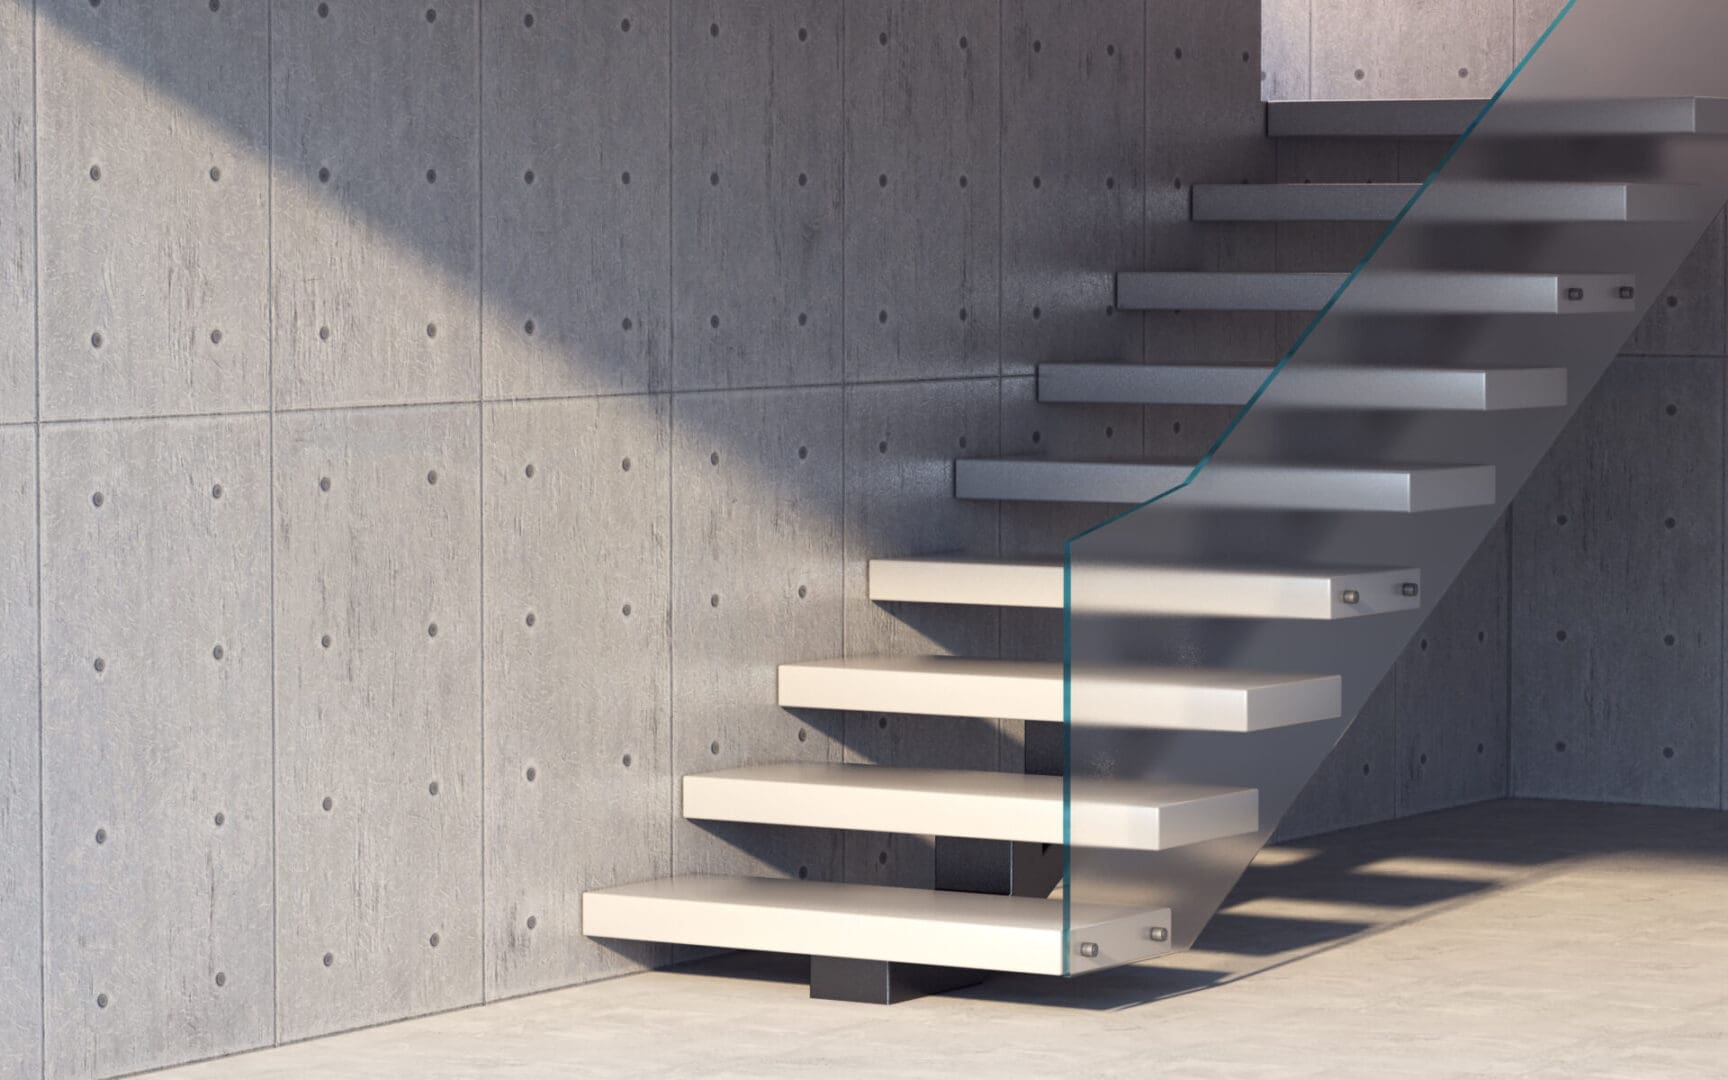 A staircase with glass steps and concrete walls.